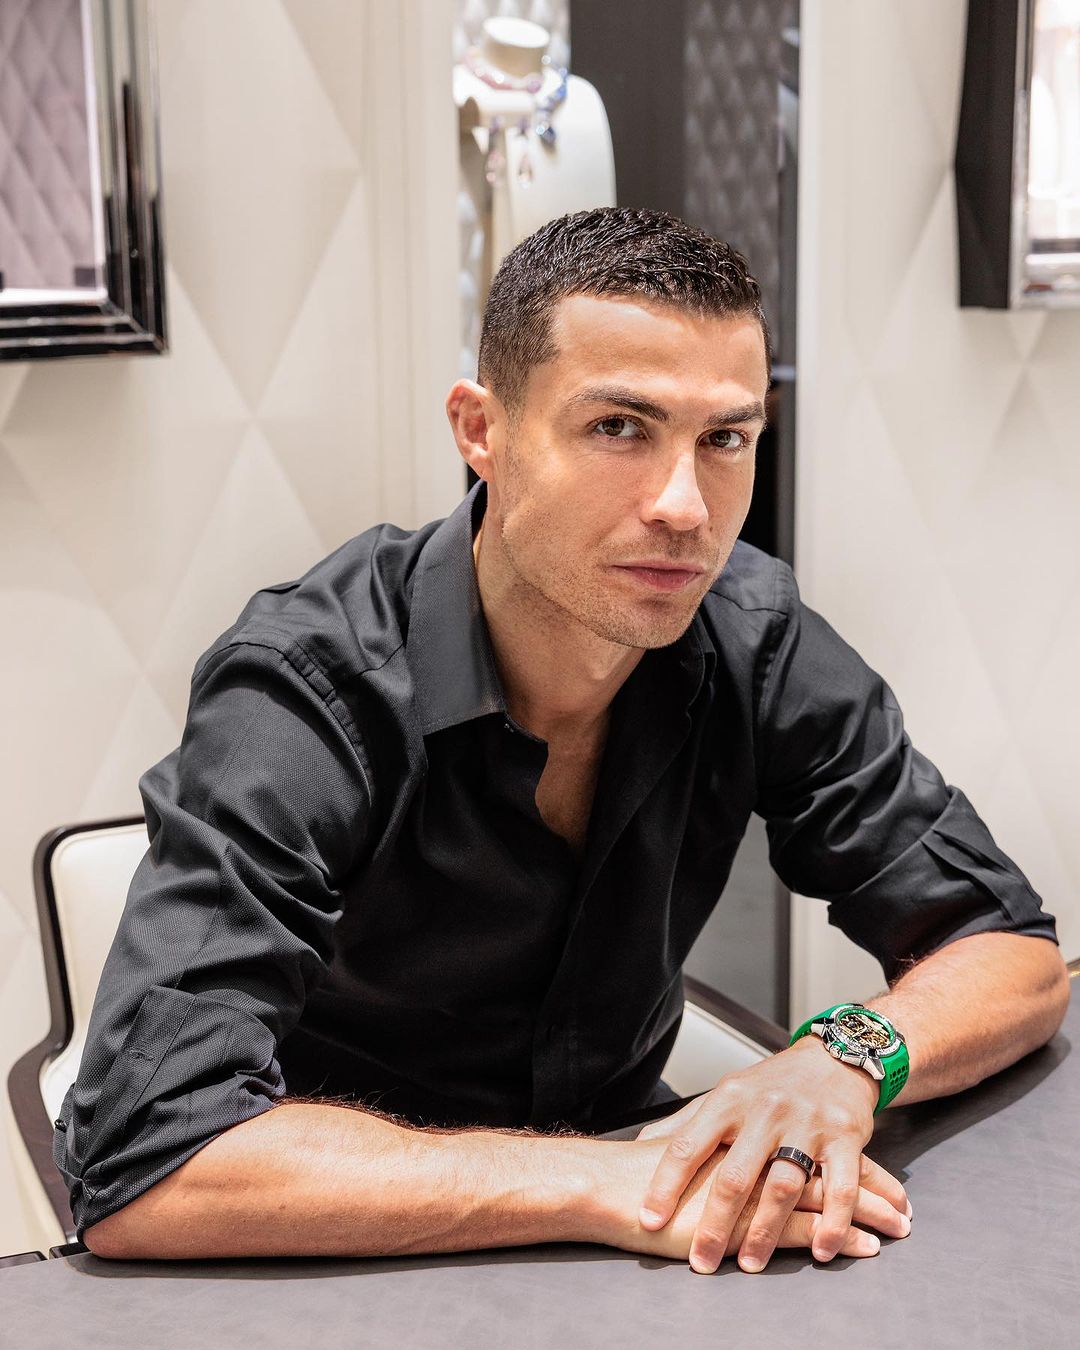 Ronaldo even invested in a company which sells watches